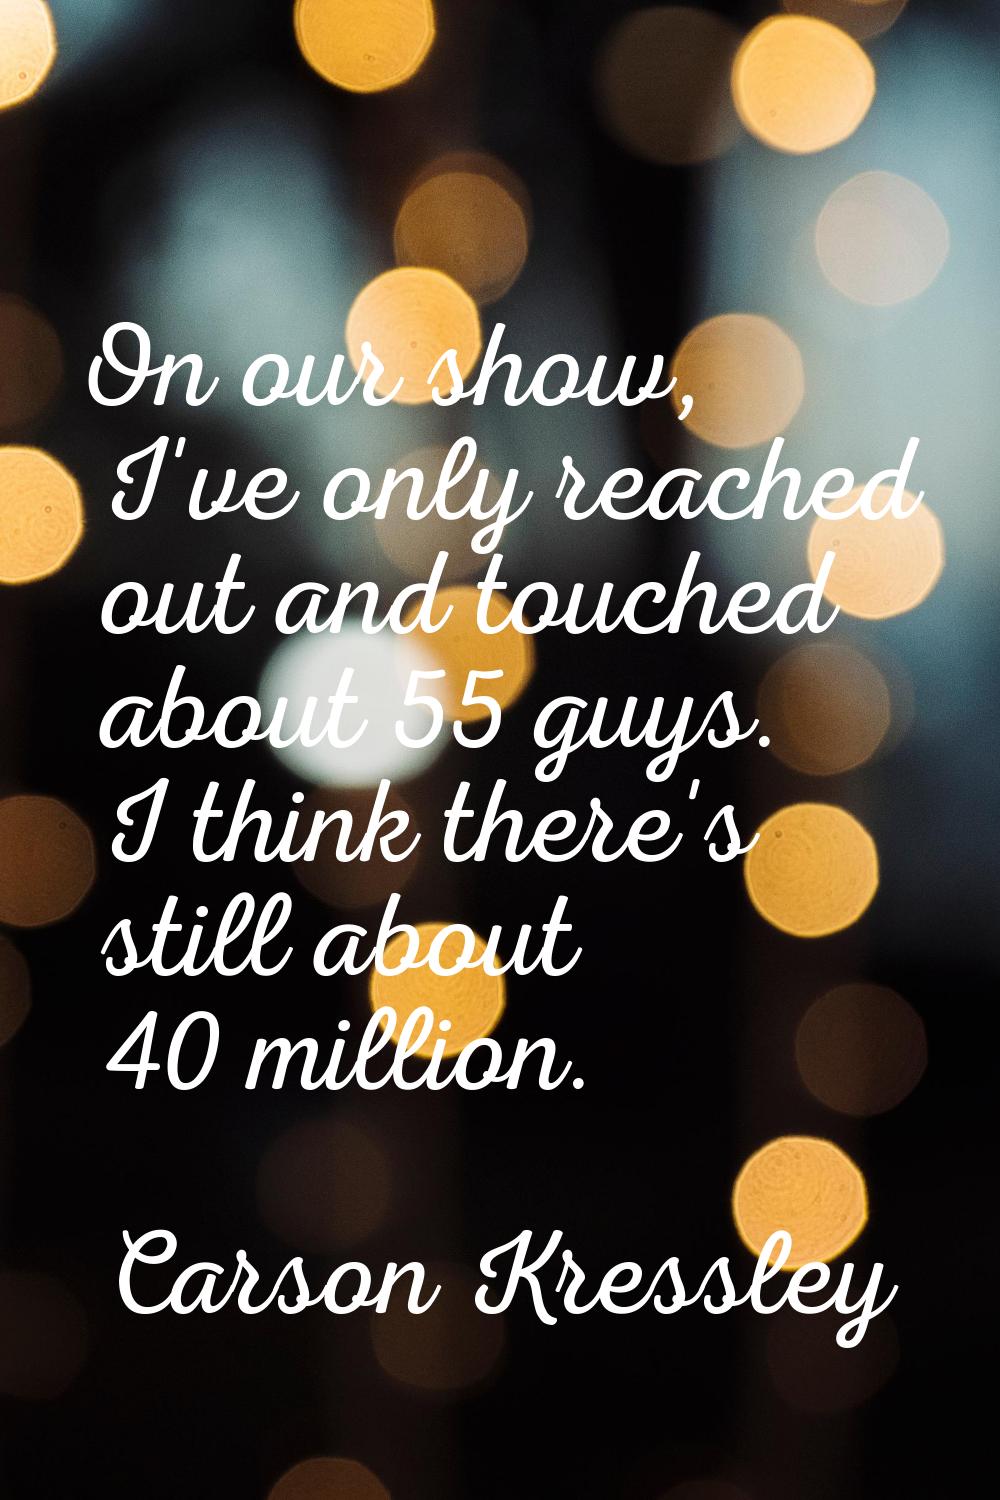 On our show, I've only reached out and touched about 55 guys. I think there's still about 40 millio